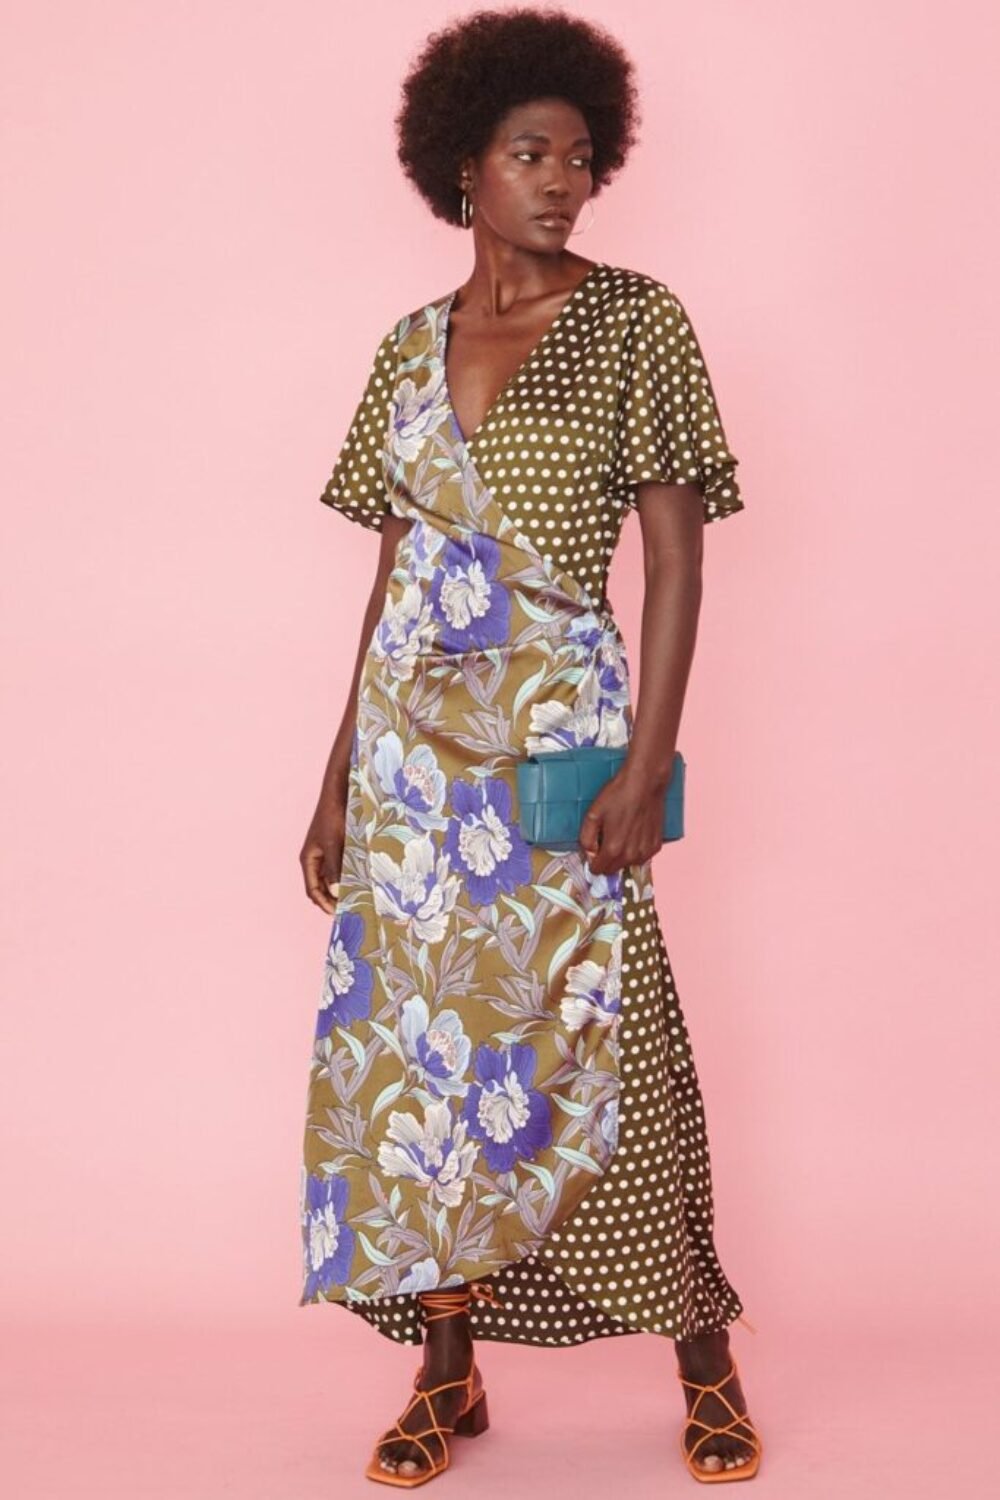 Shop Lux Floral and Polka Dot Wrap Maxi Dres and women's luxury and designer clothes at www.lux-apparel.co.uk